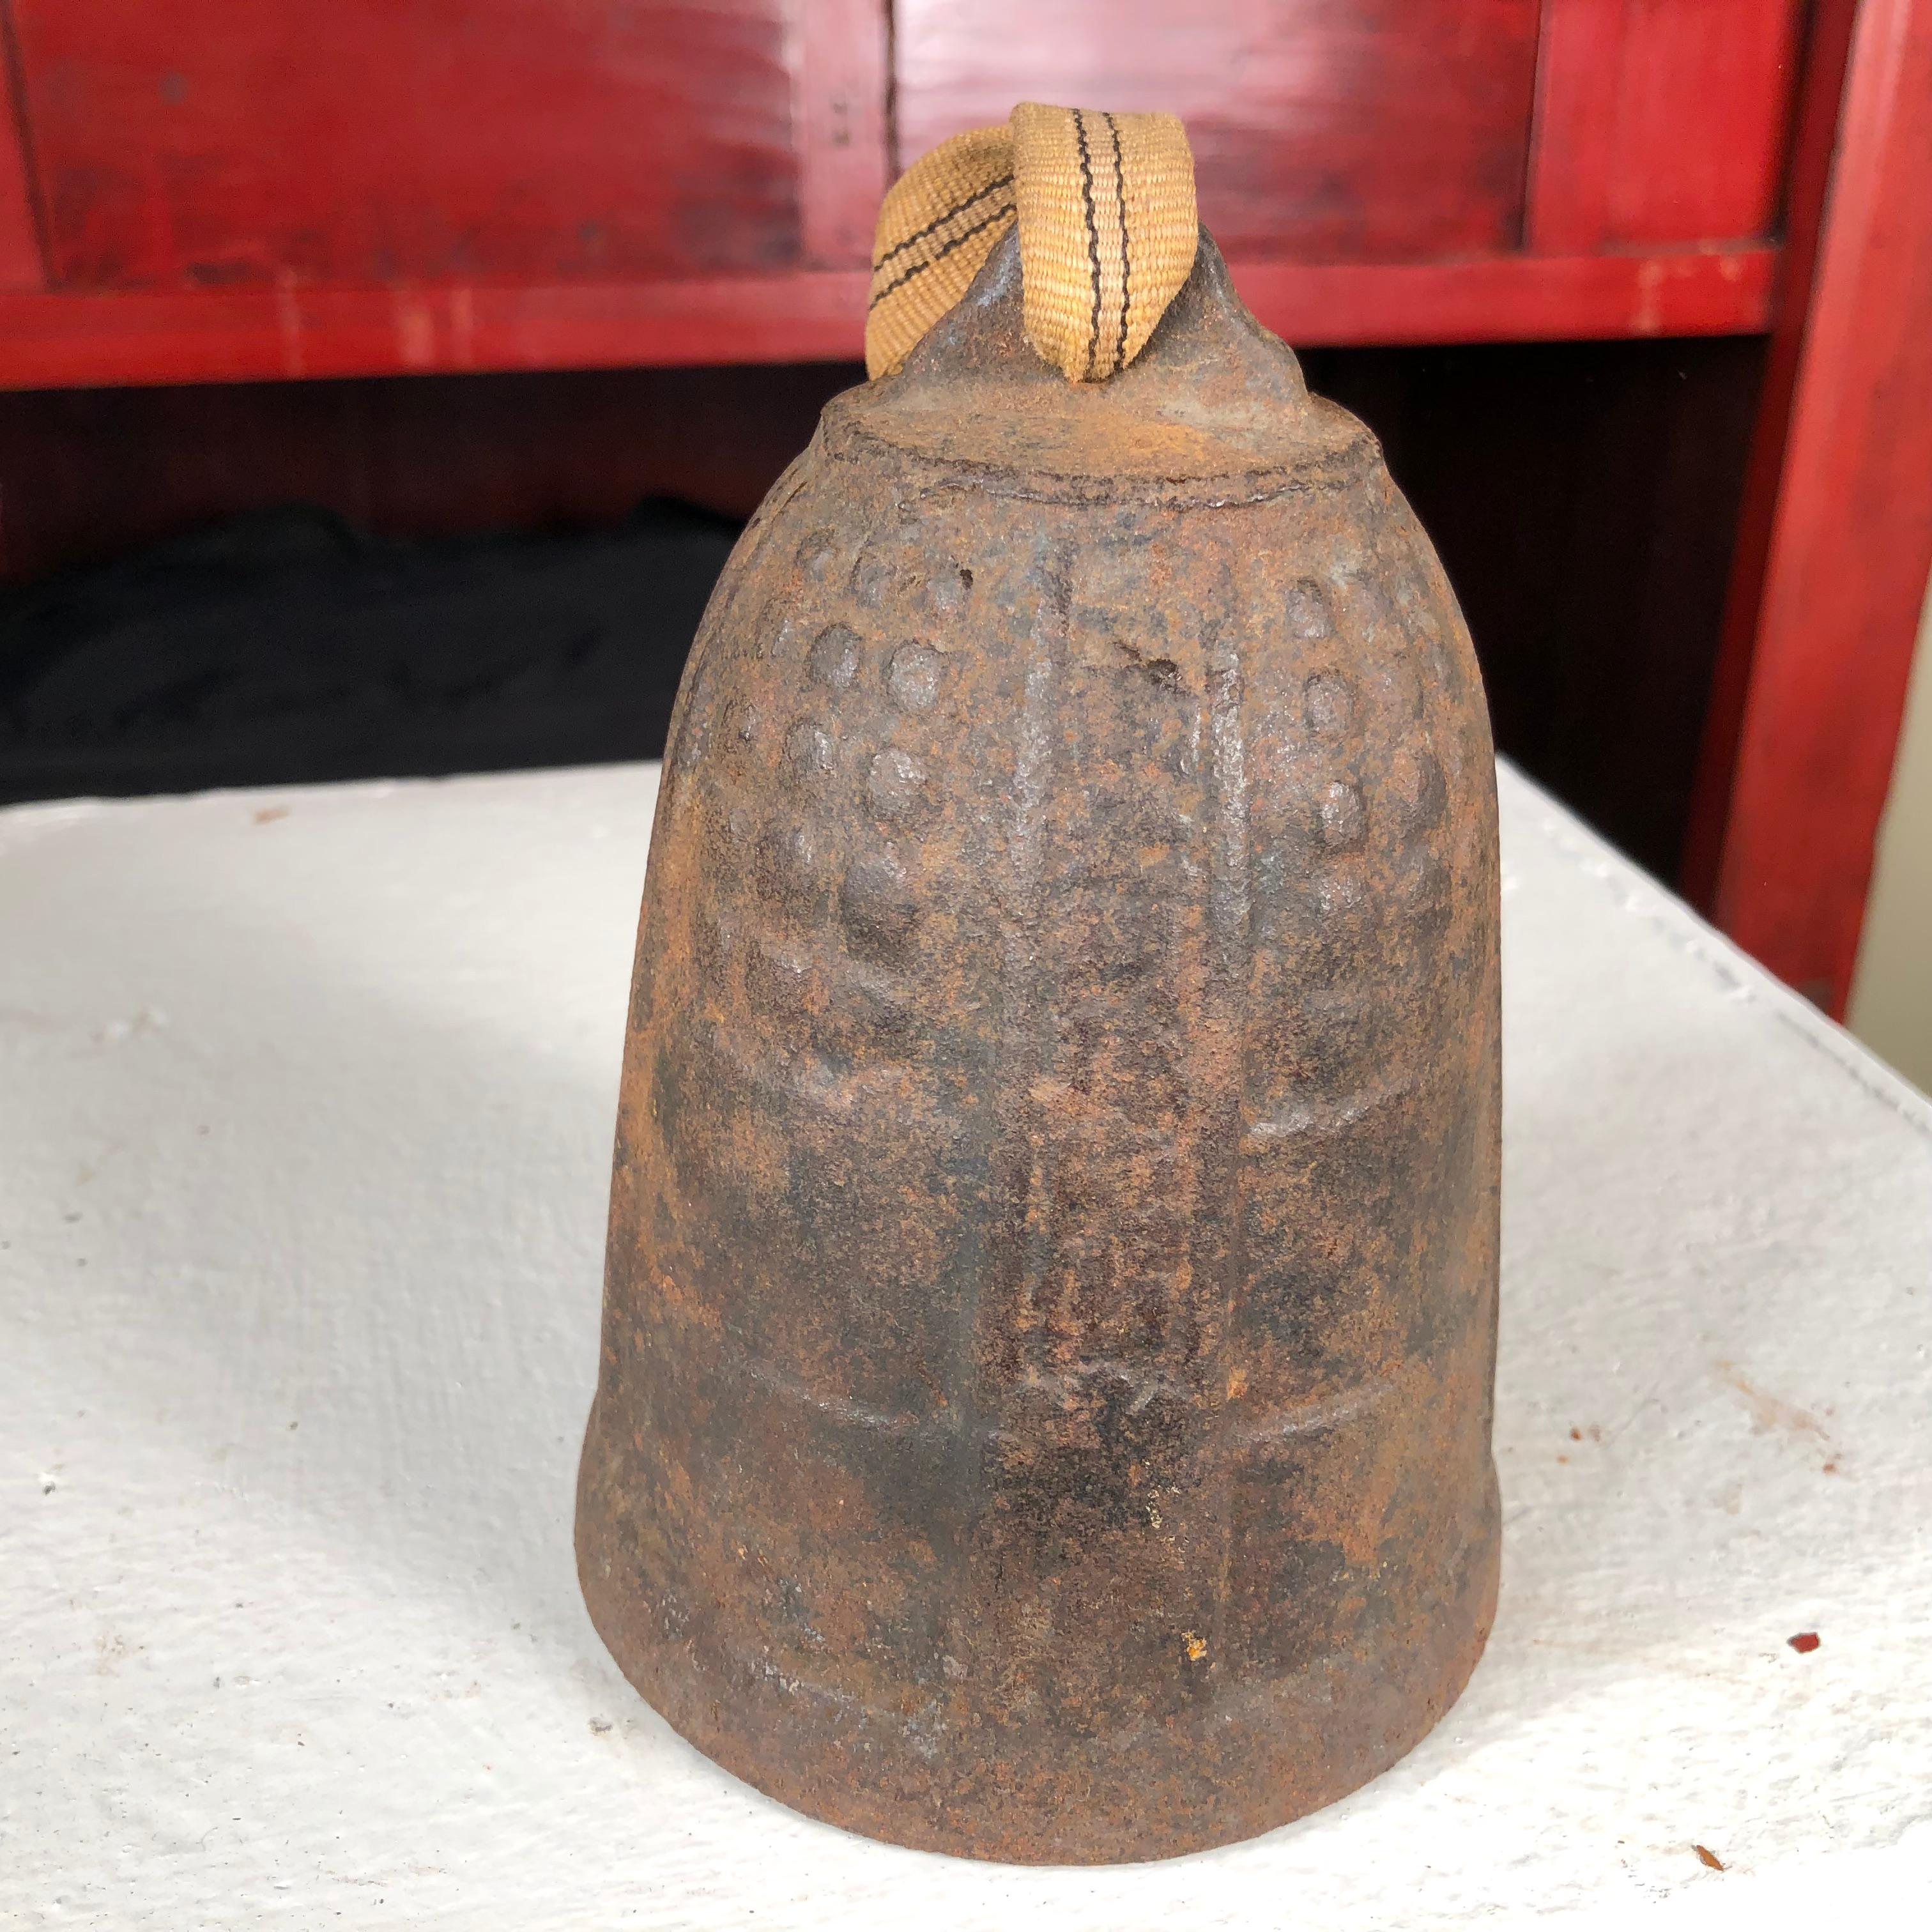 Fresh find from our recent Japanese acquisitions travels

Here's a rare treasure from Japan and an unusual find, an excellent candidate to accent your indoor or outdoor garden space. 

This is a fine antique medium scale bell-which was sourced